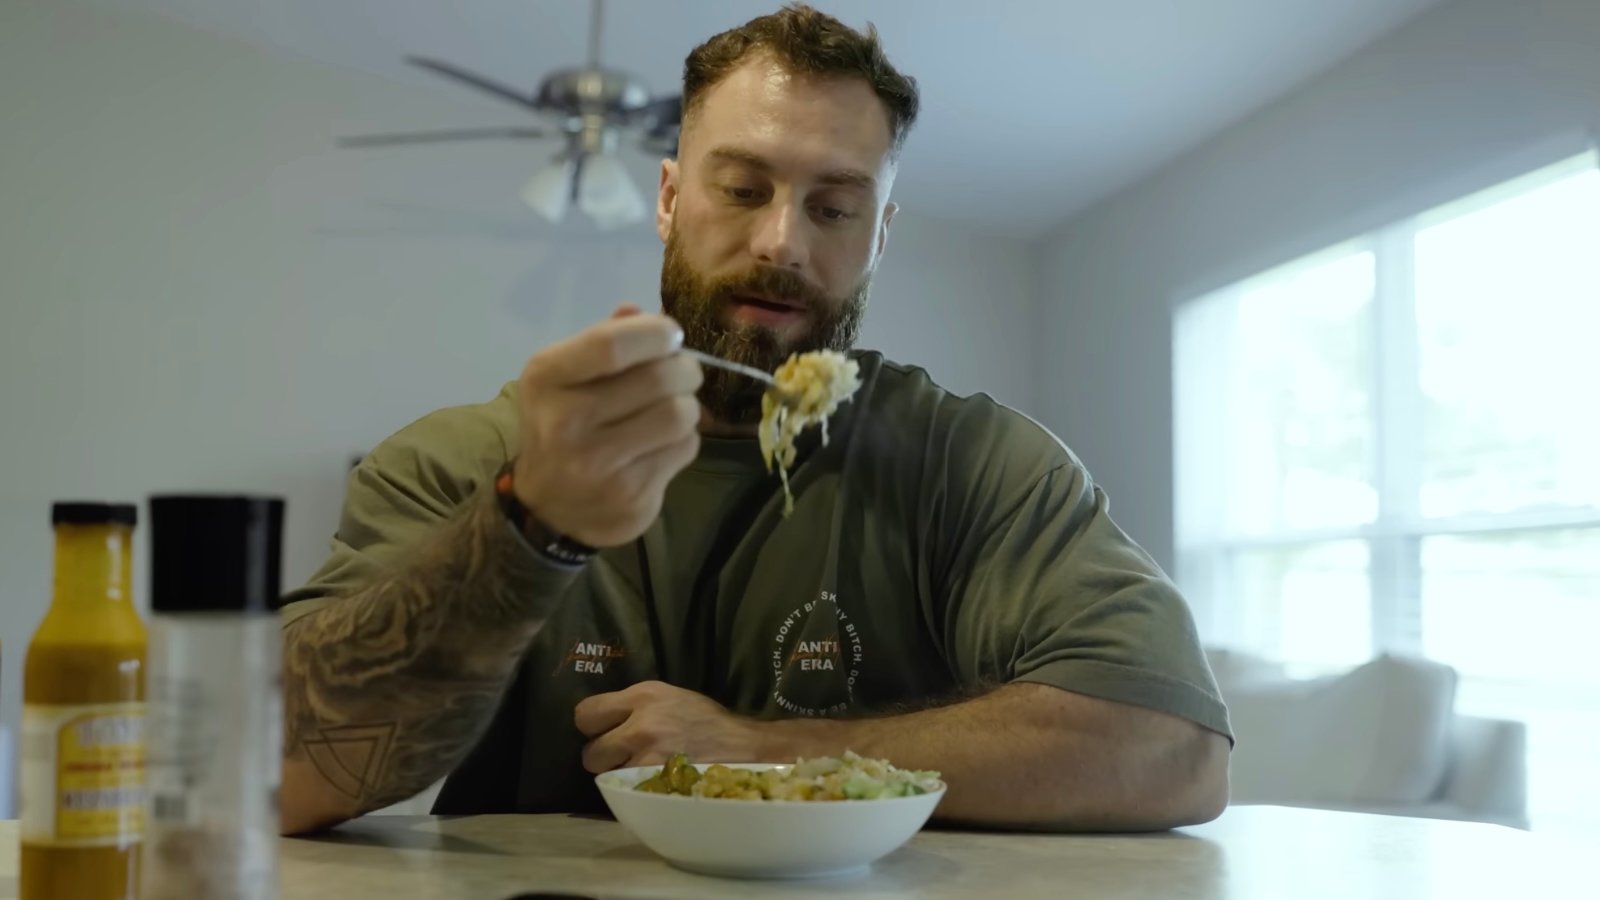 reigning-champion-chris-bumstead-shares-full-day-of-eating-6-weeks-out-from-2023-mr.-olympia -–-breaking-muscle